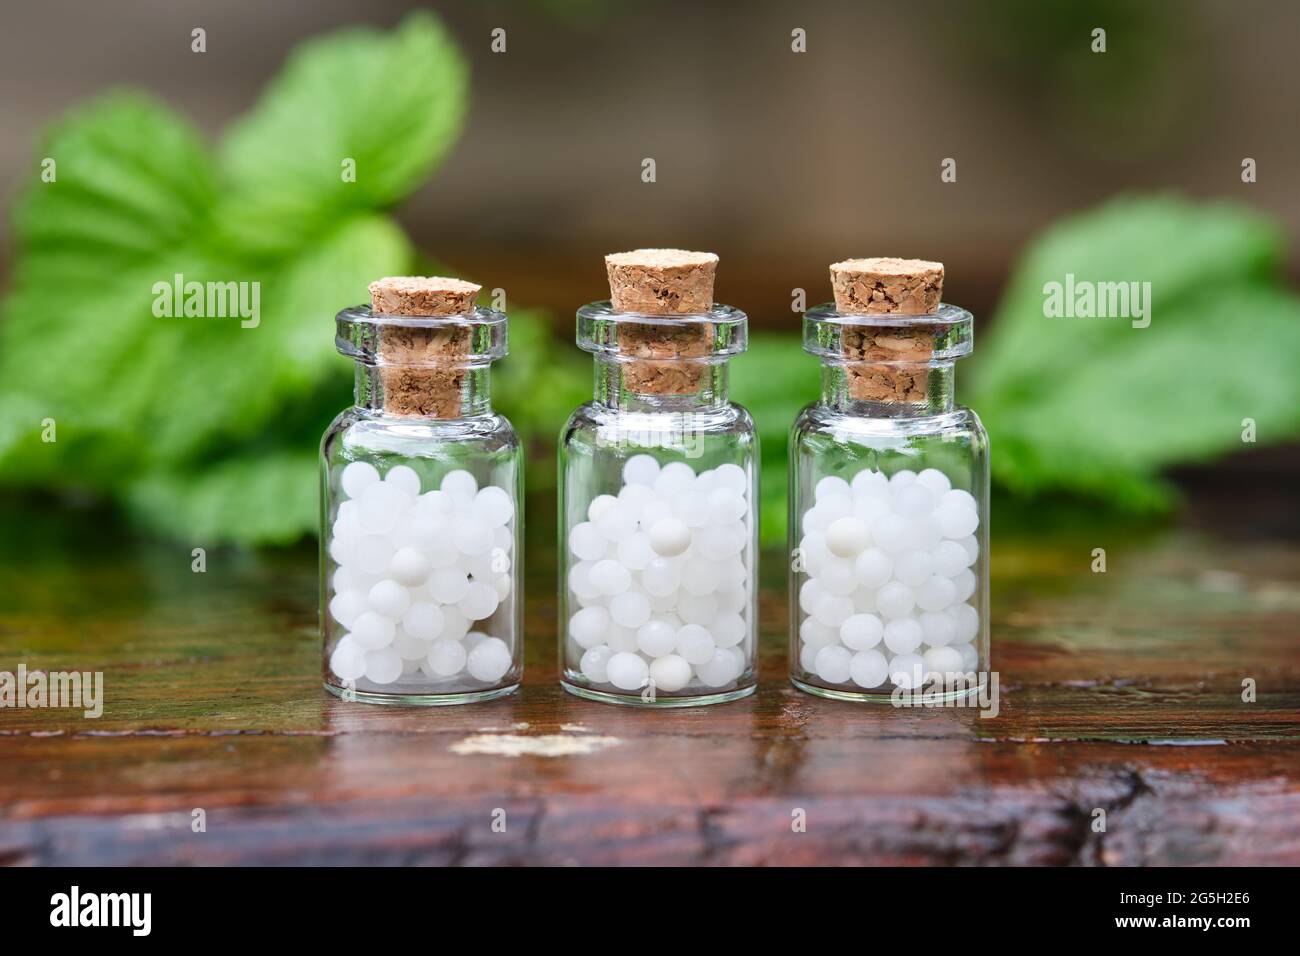 Three bottles of homeopathy globules. Bottles of homeopathic granules. Medicinal herbs on background. Homeopathy medicine concept. Stock Photo